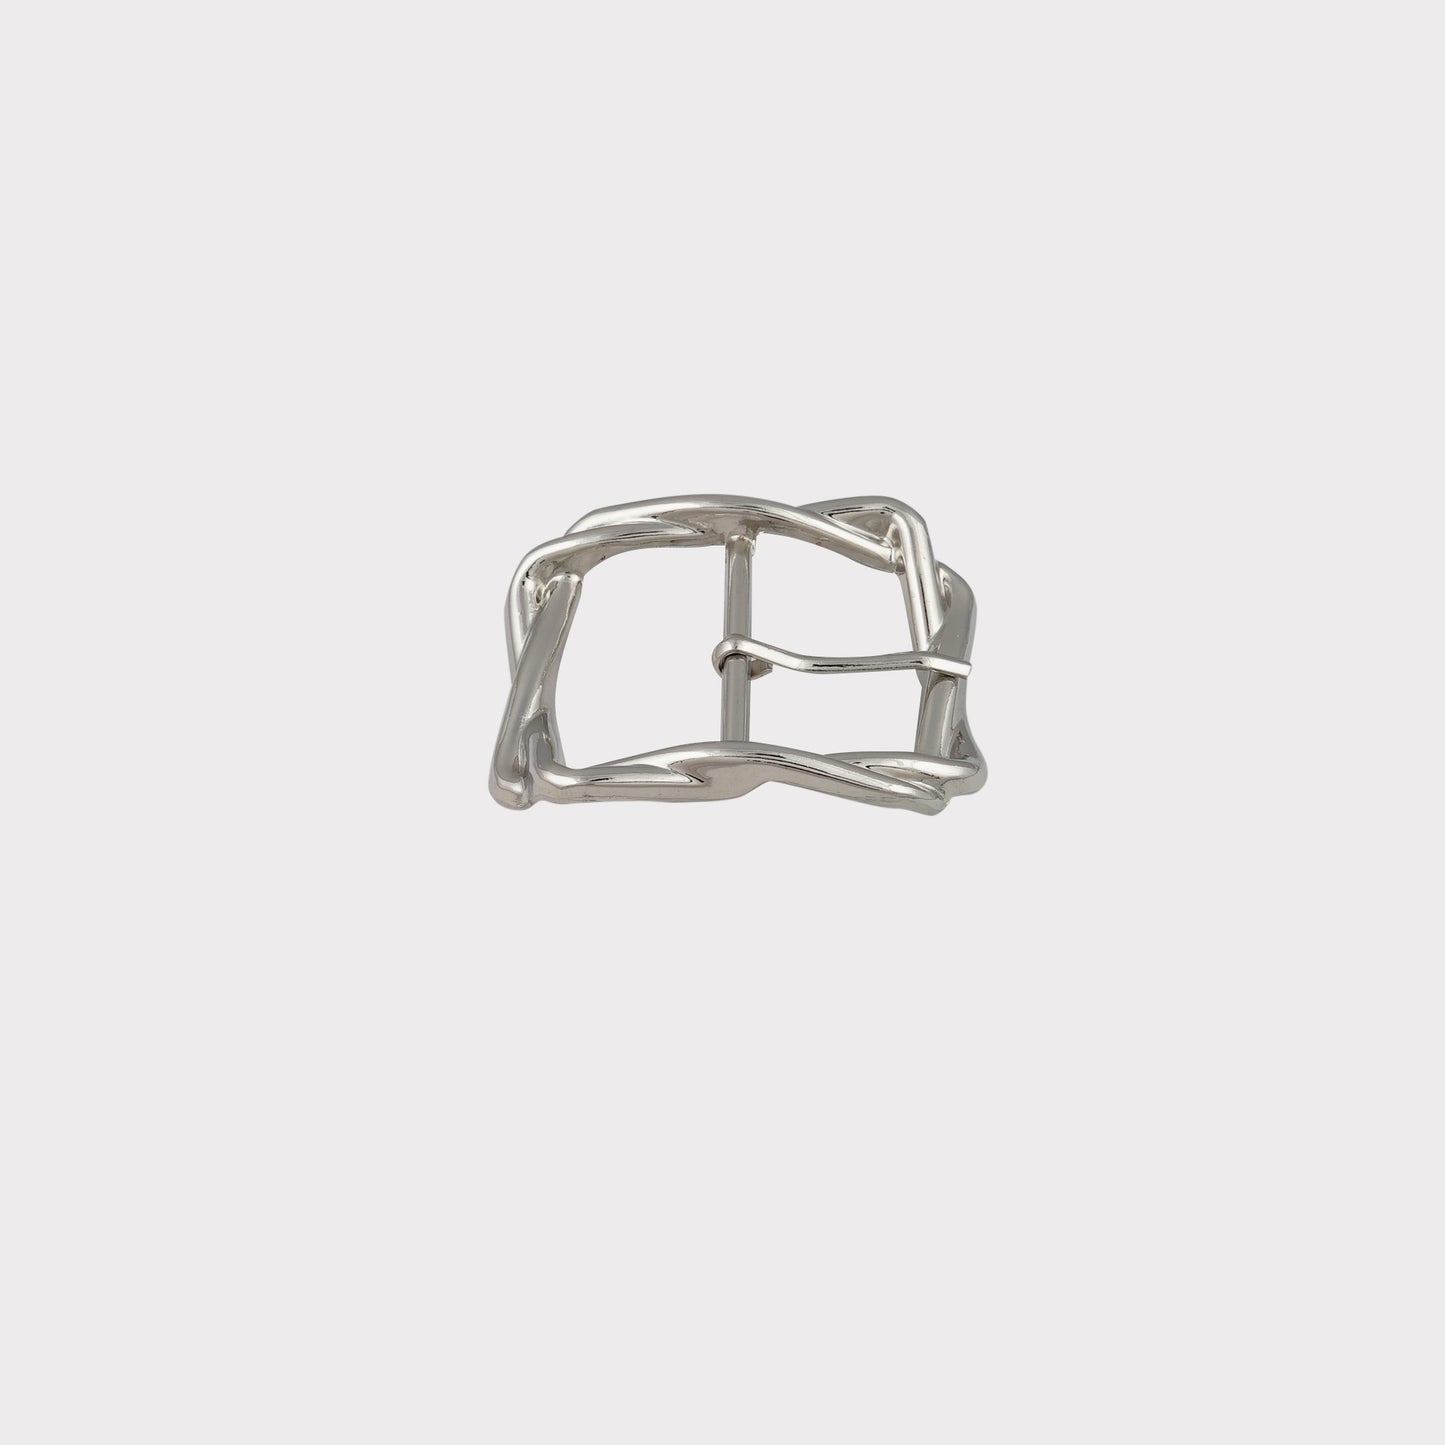 Square Shape Silver Belt Buckle (Pack of 1 Pc)